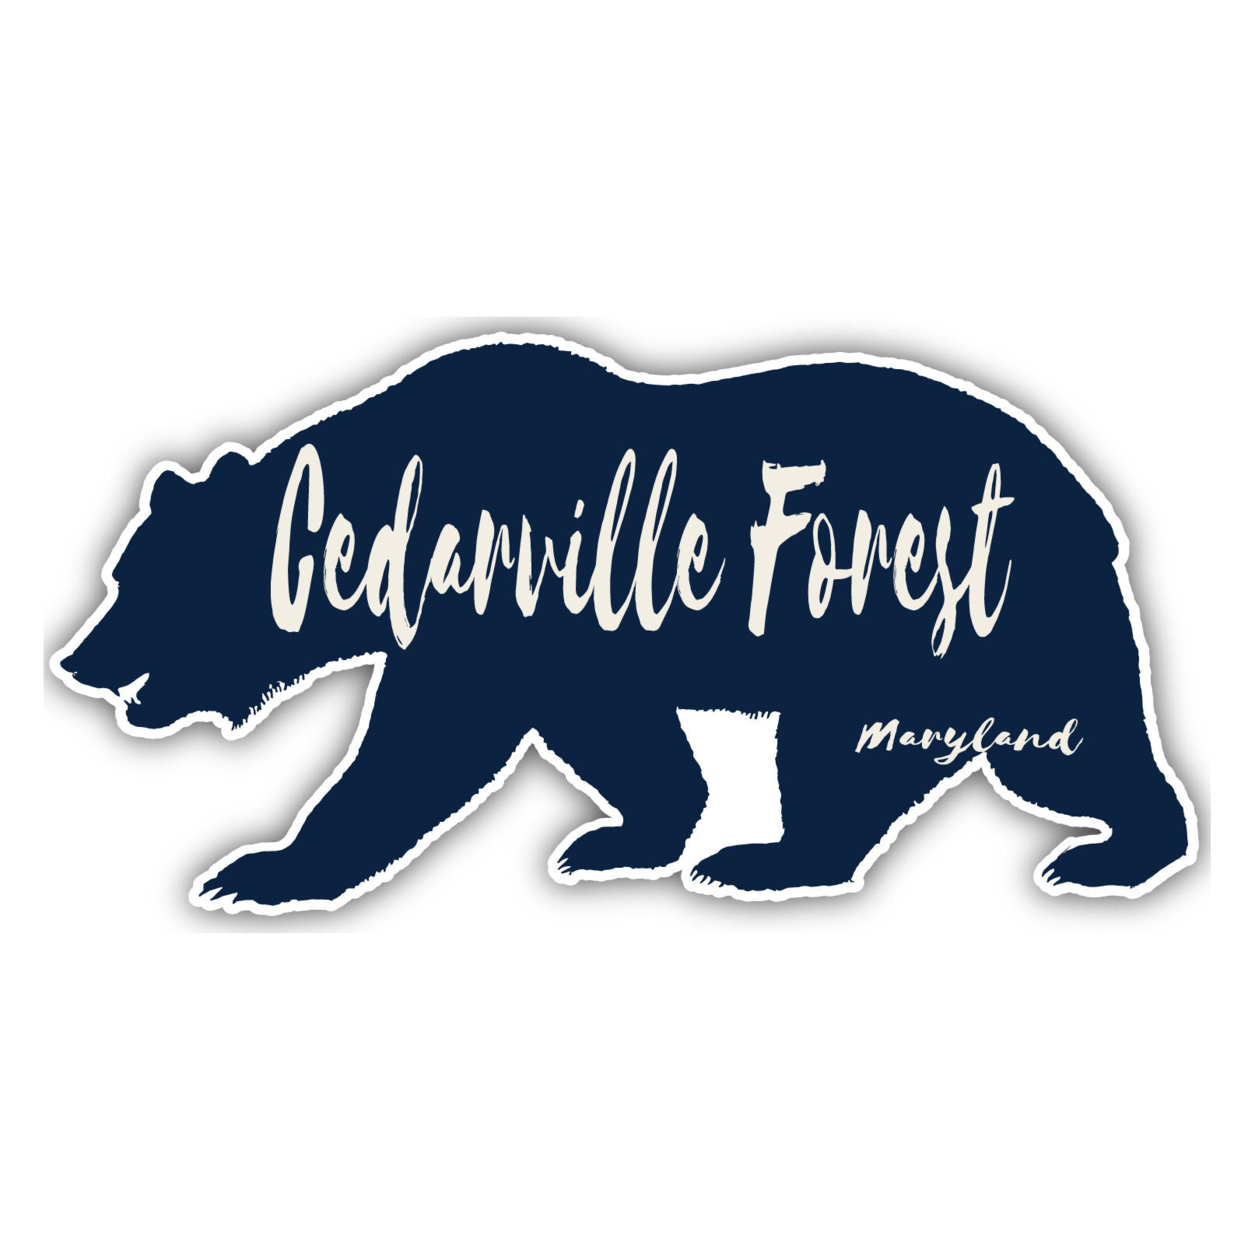 Cedarville Forest Maryland Souvenir Decorative Stickers (Choose Theme And Size) - 4-Pack, 12-Inch, Bear